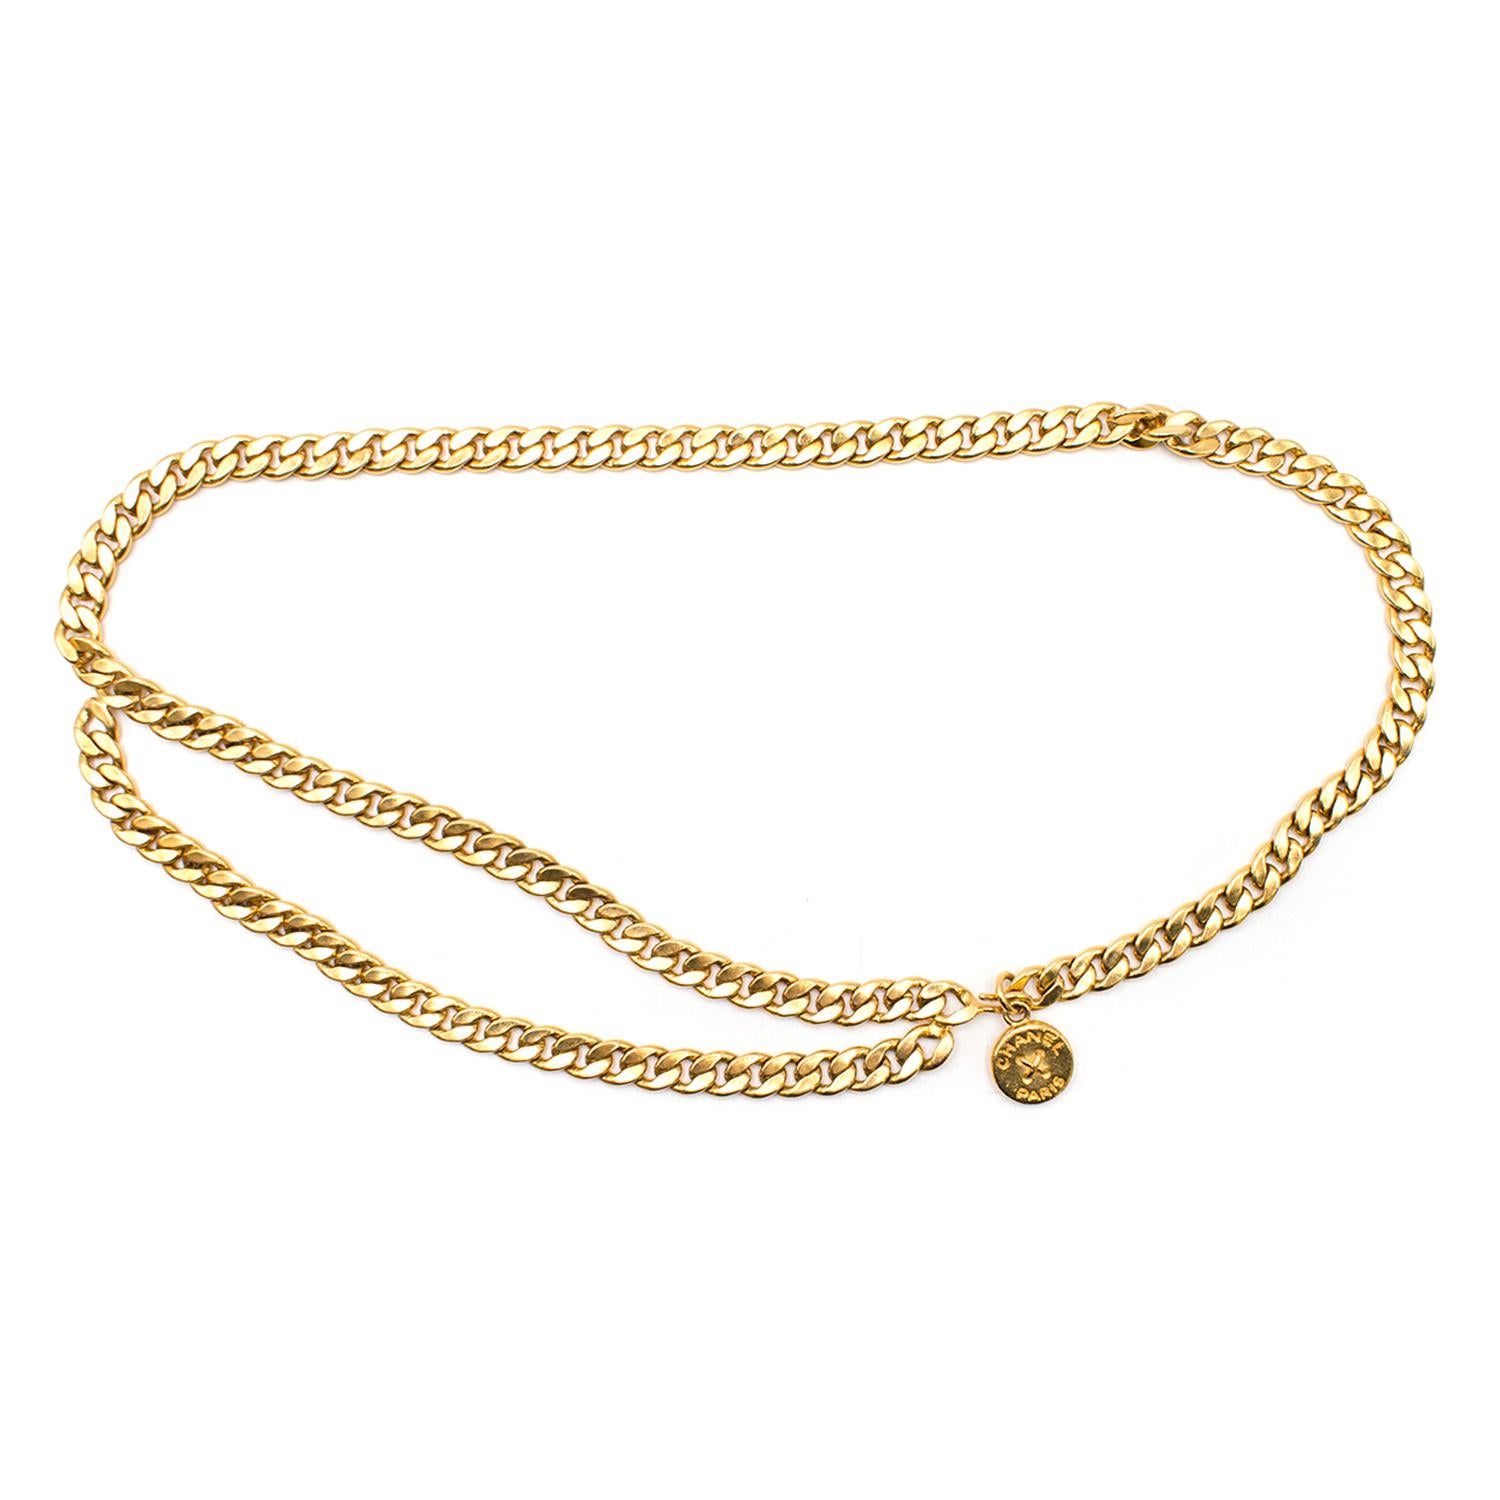 Chanel Vintage 1994 Gold-plated Chain Belt/Necklace 2